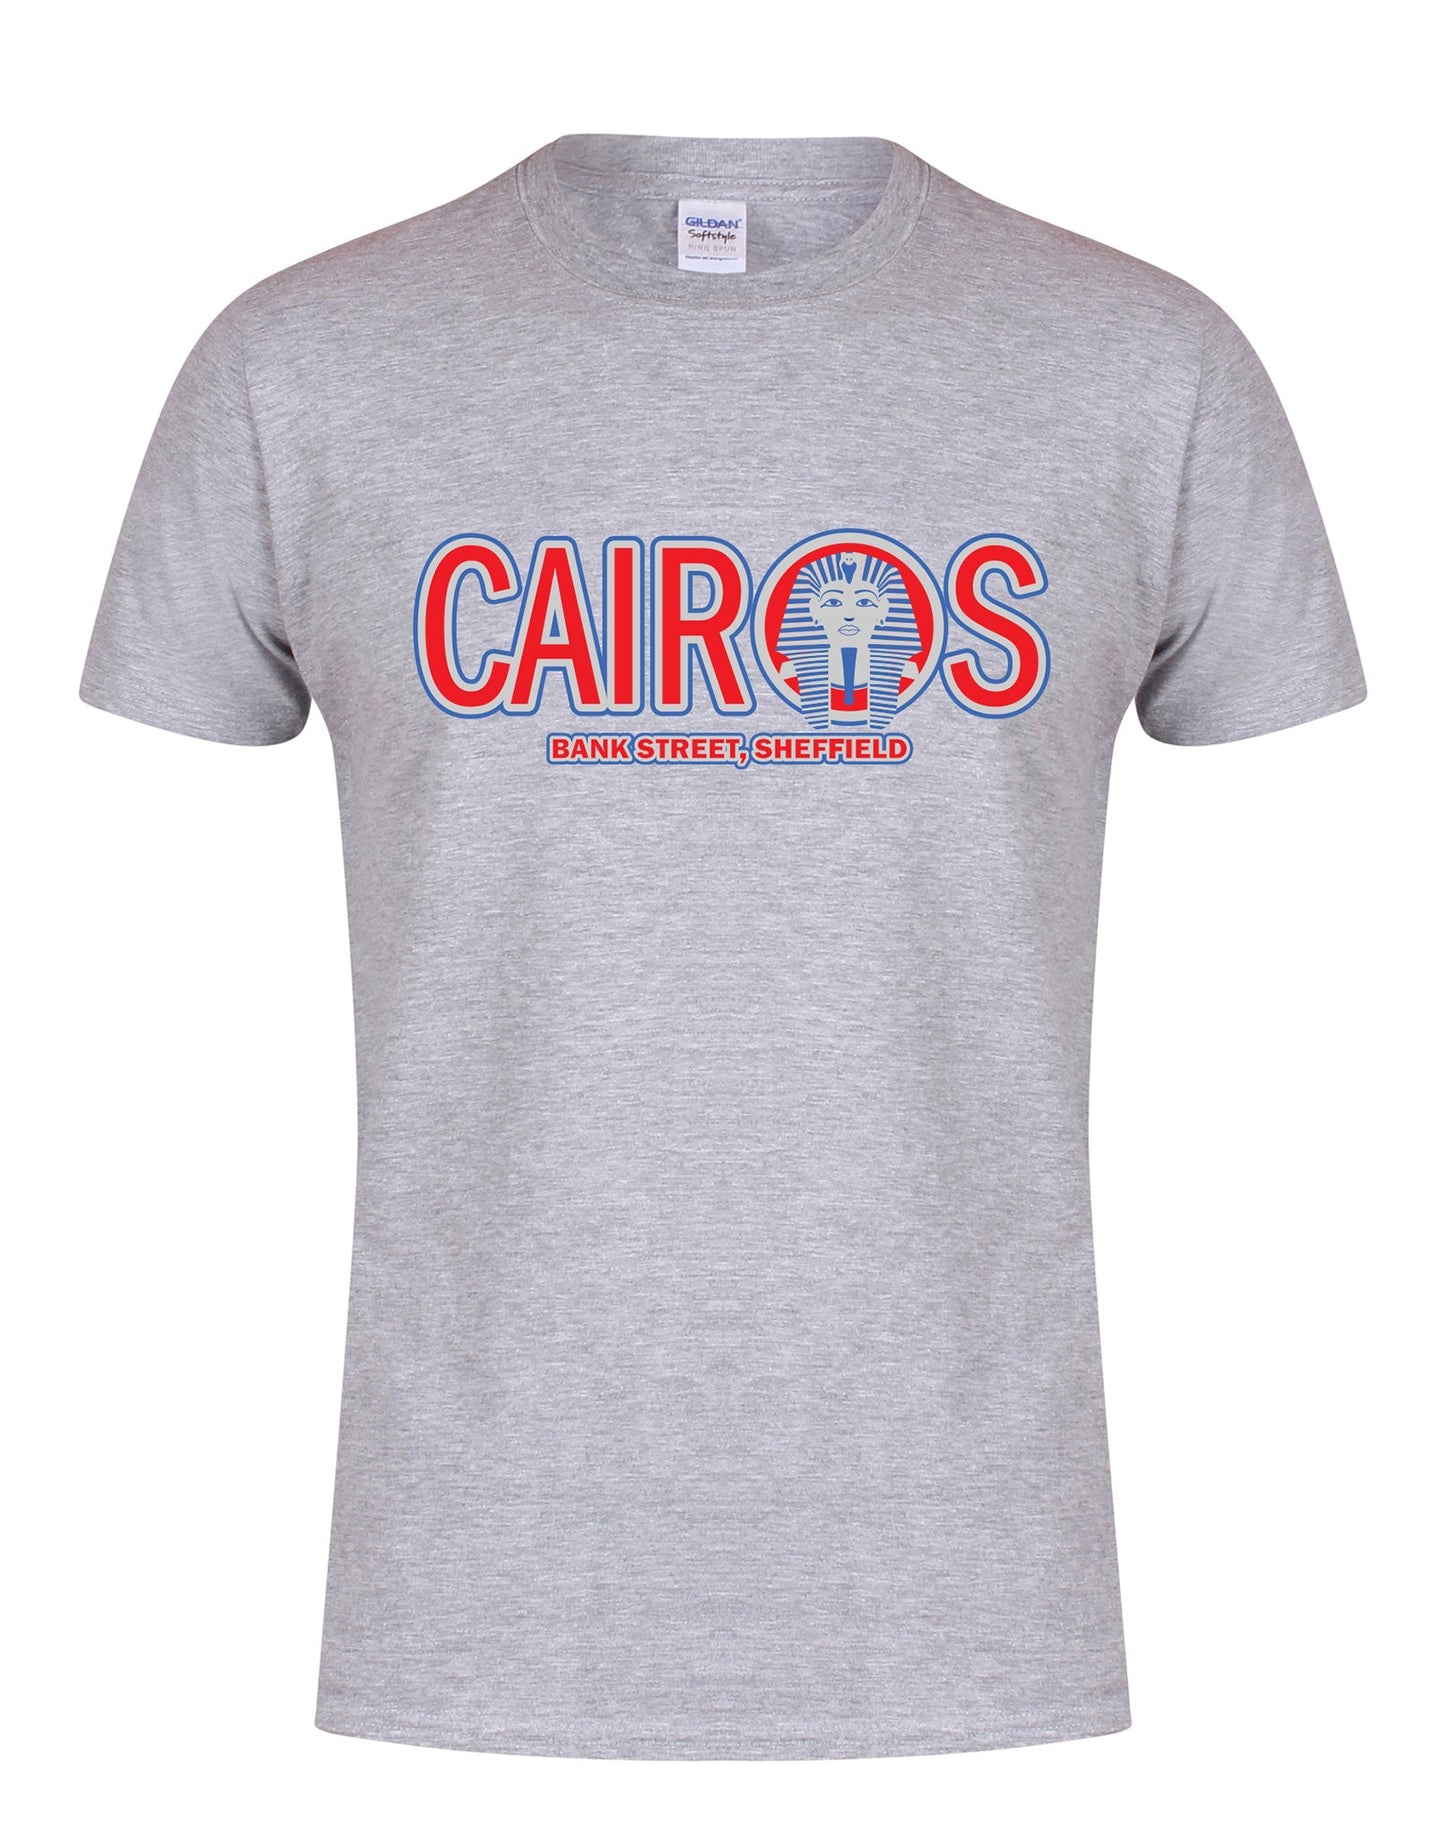 Cairos unisex fit T-shirt - various colours - Dirty Stop Outs